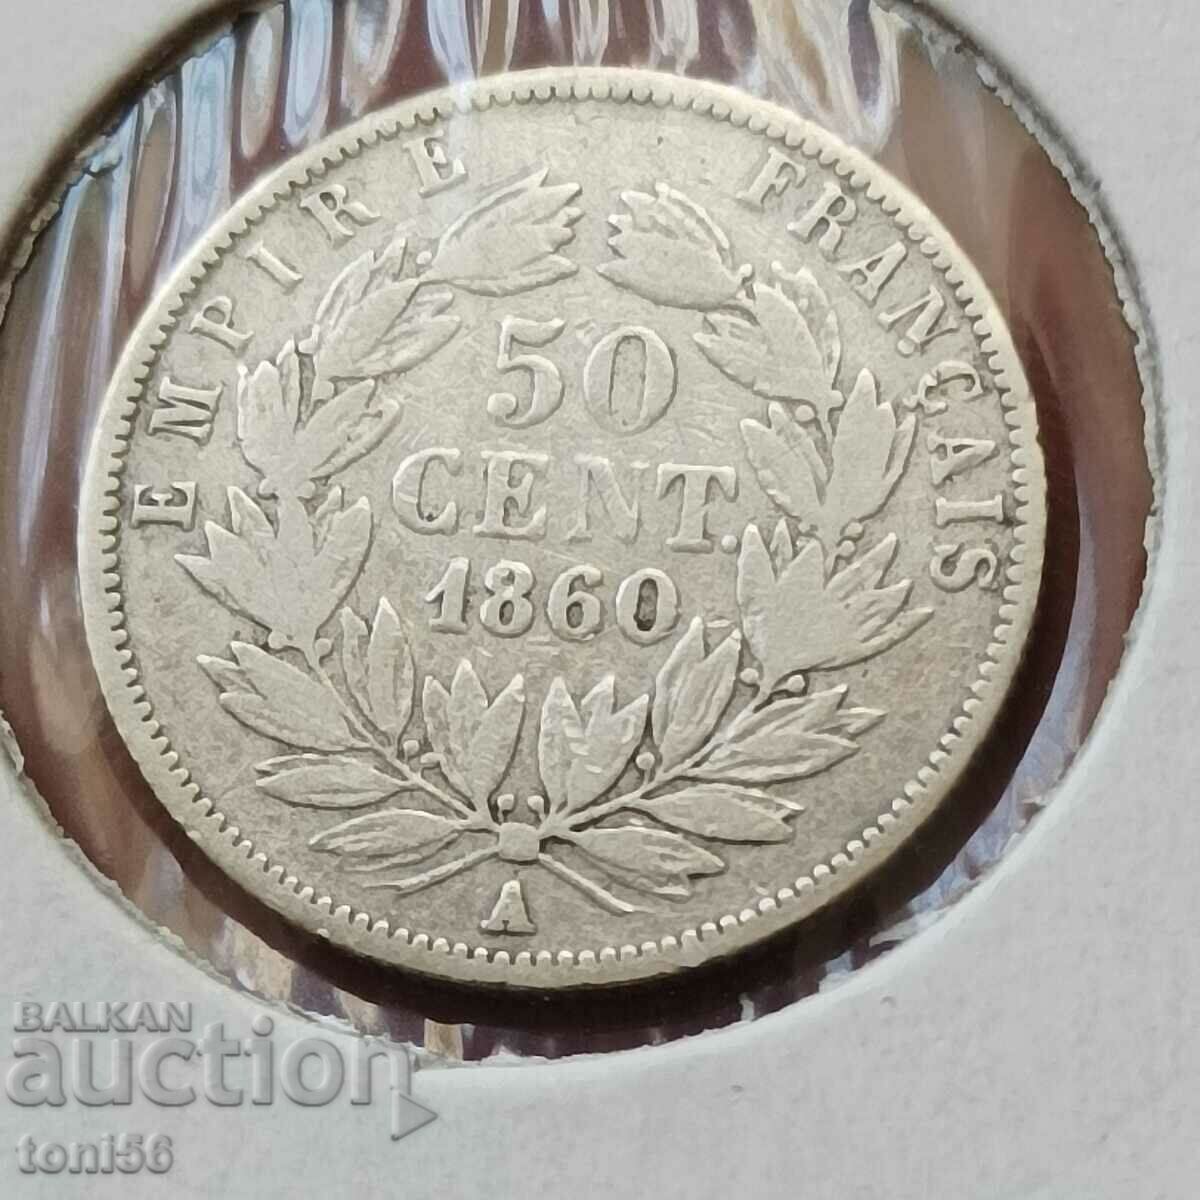 France 50 centimes 1860 A silver